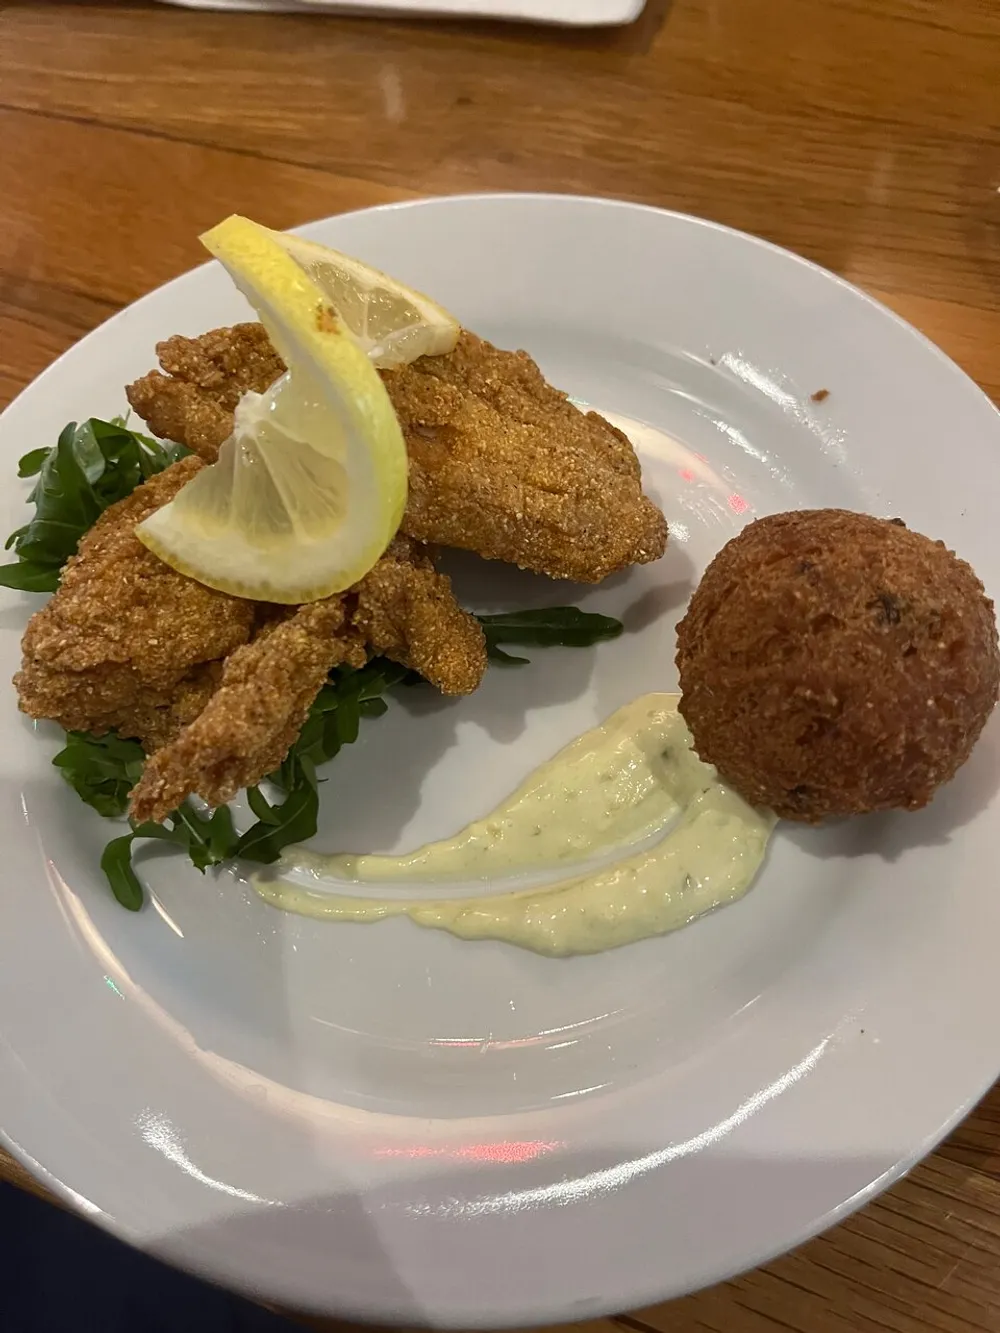 The image depicts a plate of breaded fried food possibly fish garnished with a lemon slice accompanied by a round fried ball and a dollop of creamy sauce on a bed of greens